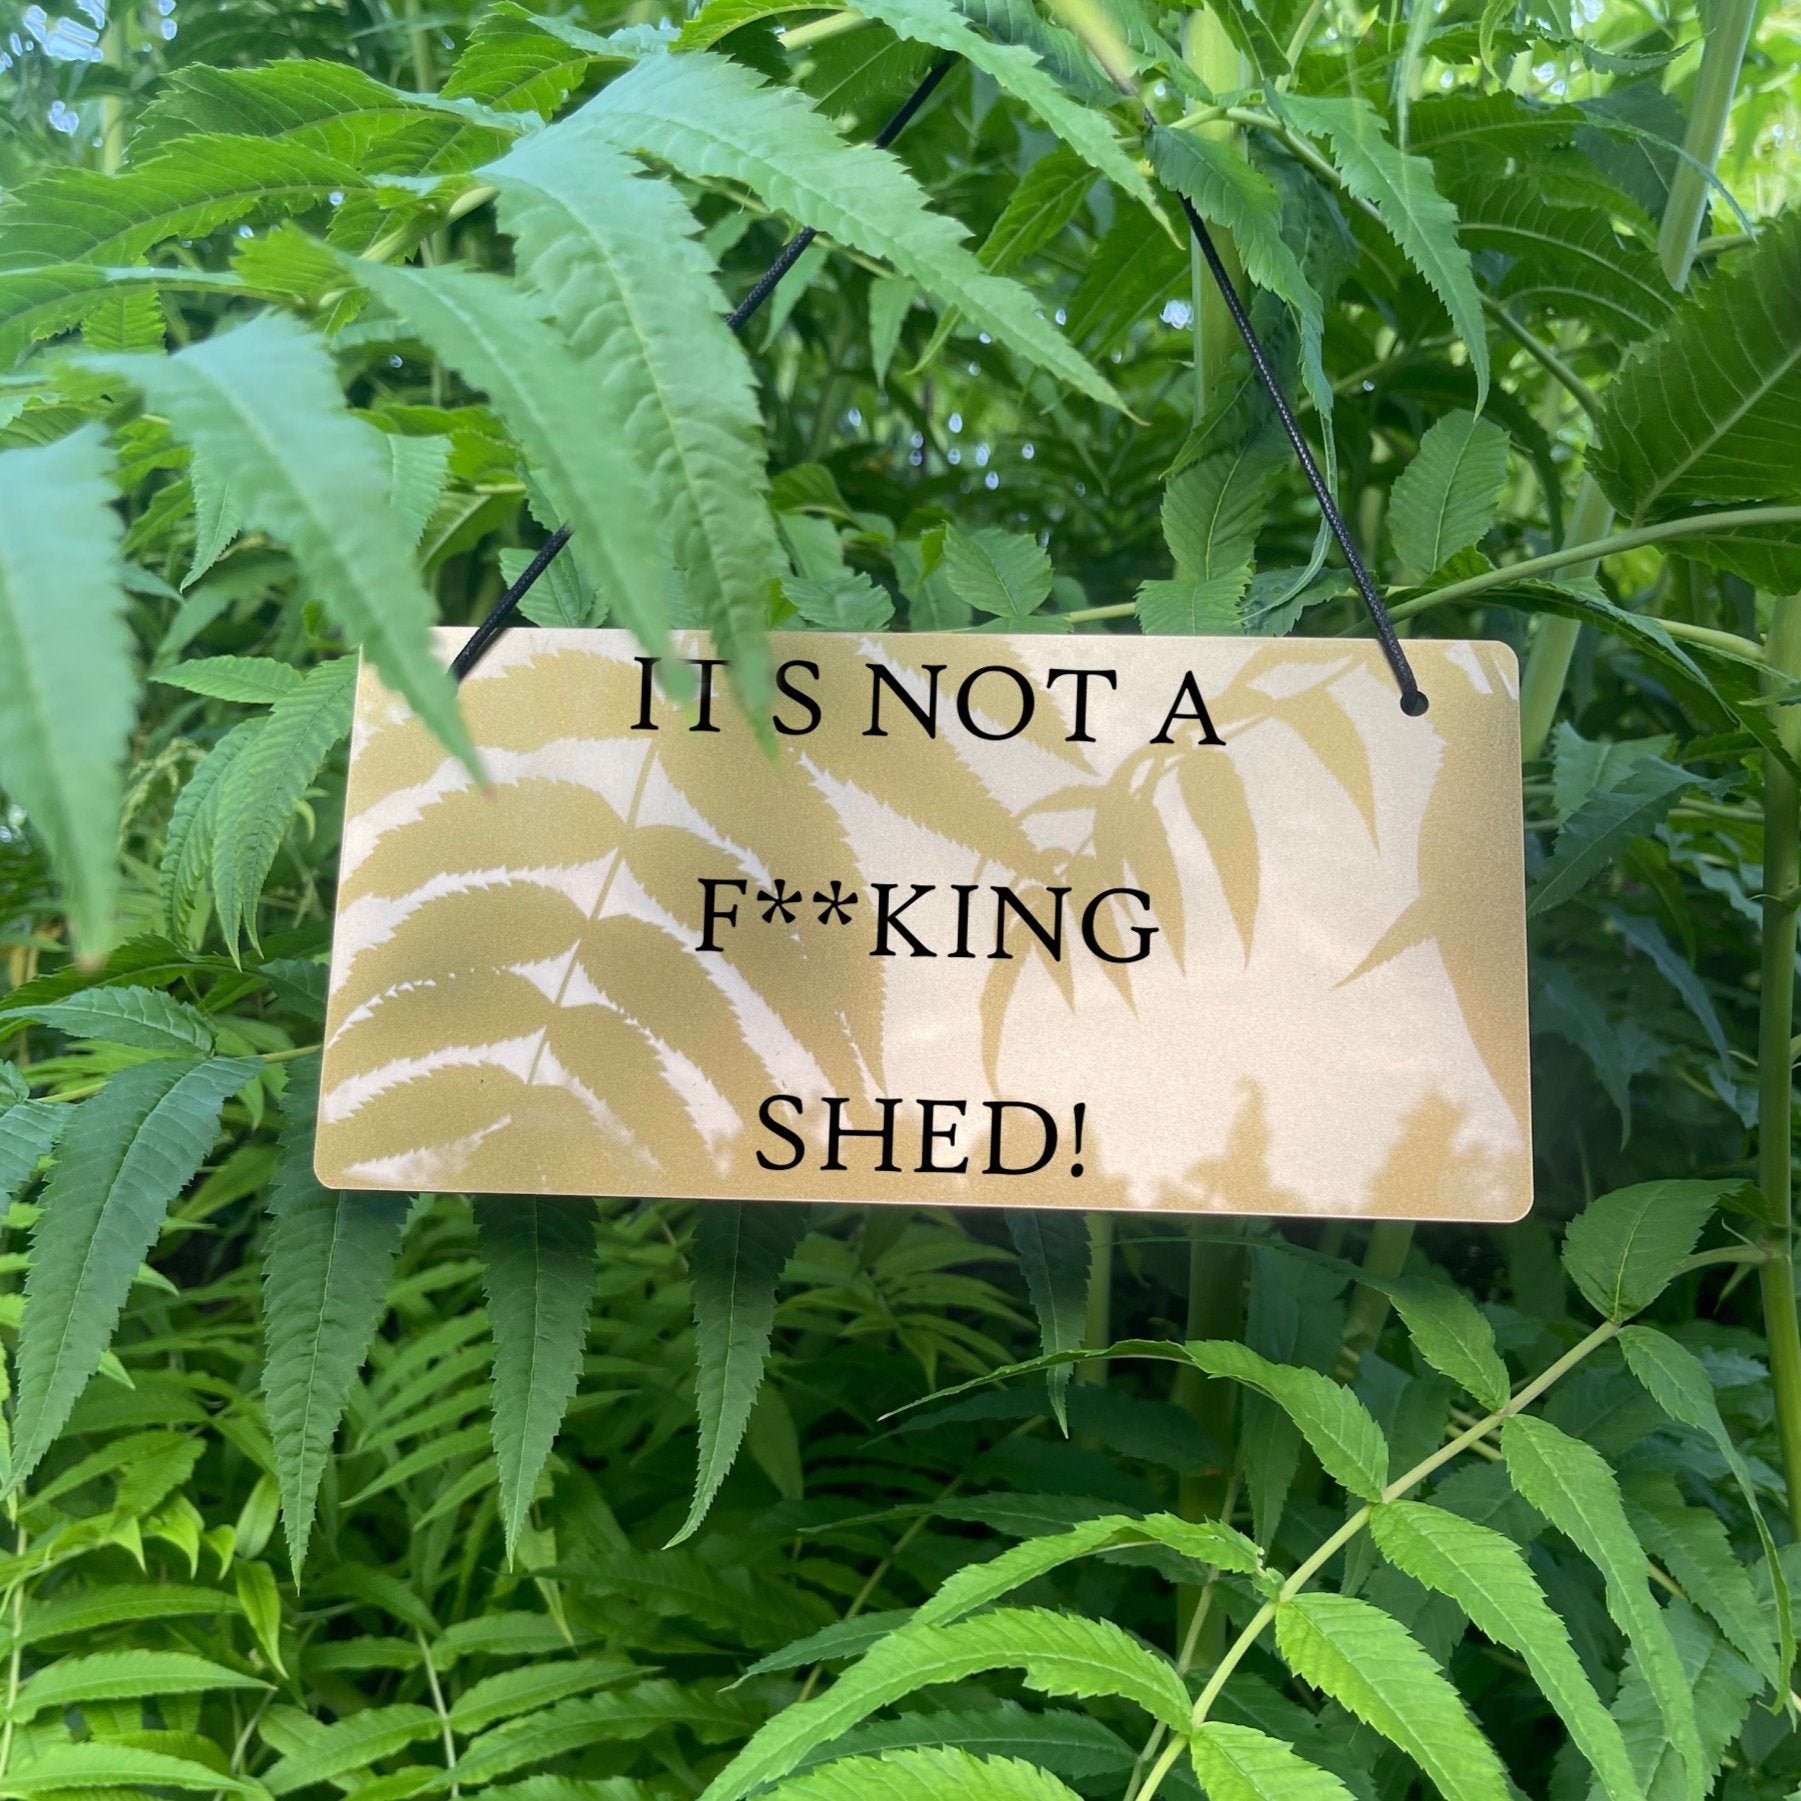 "Durable and Waterproof 'IT'S NOT A F**KING SHED' Sign" Description: A view of the sign in an outdoor setting, showcasing its durability and waterproof features. The engraved message remains intact even in various weather conditions.